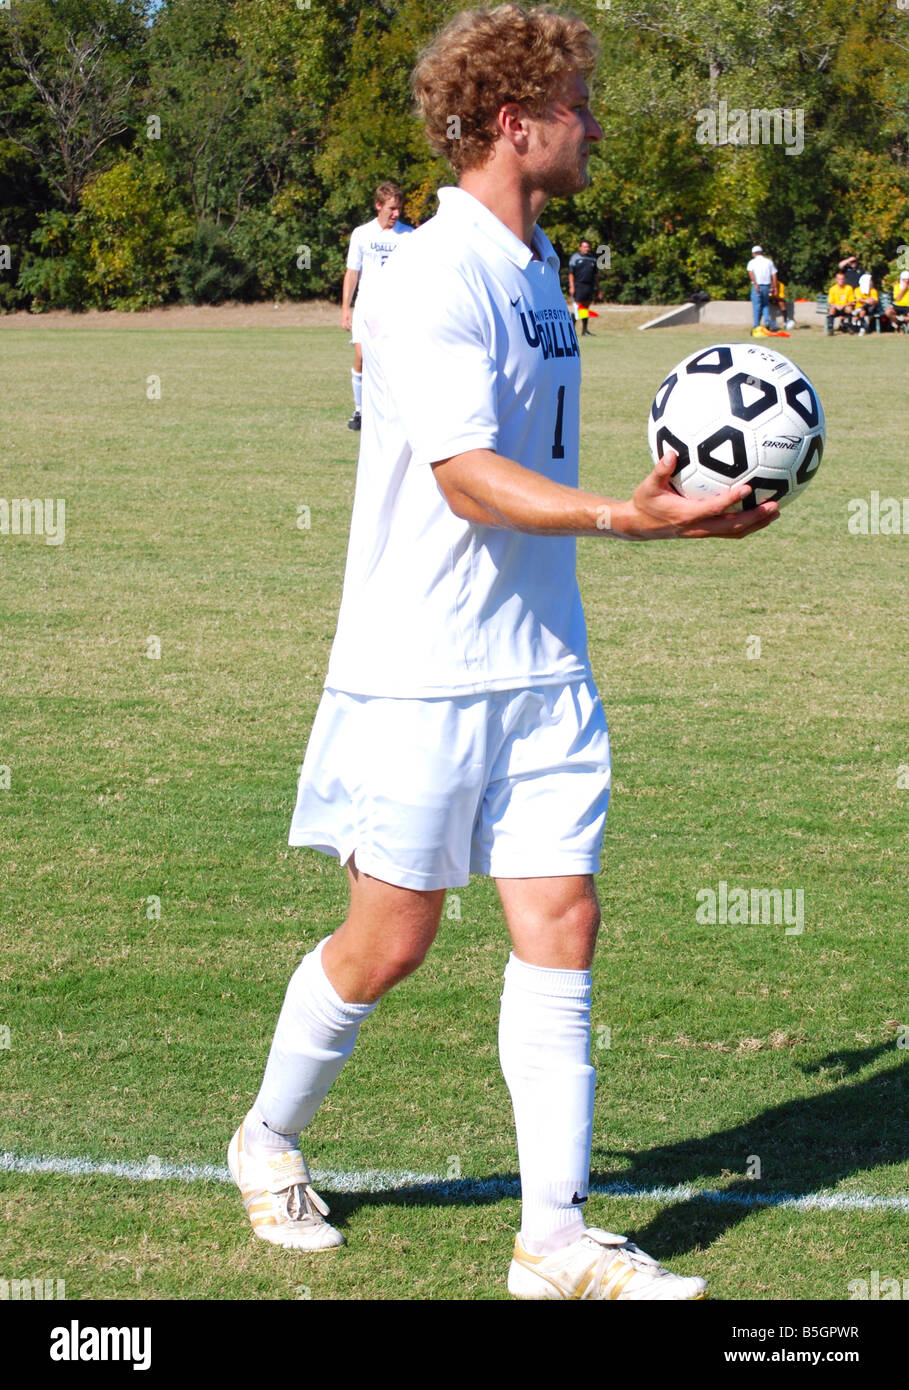 Soccer player holding a ball Stock Photo